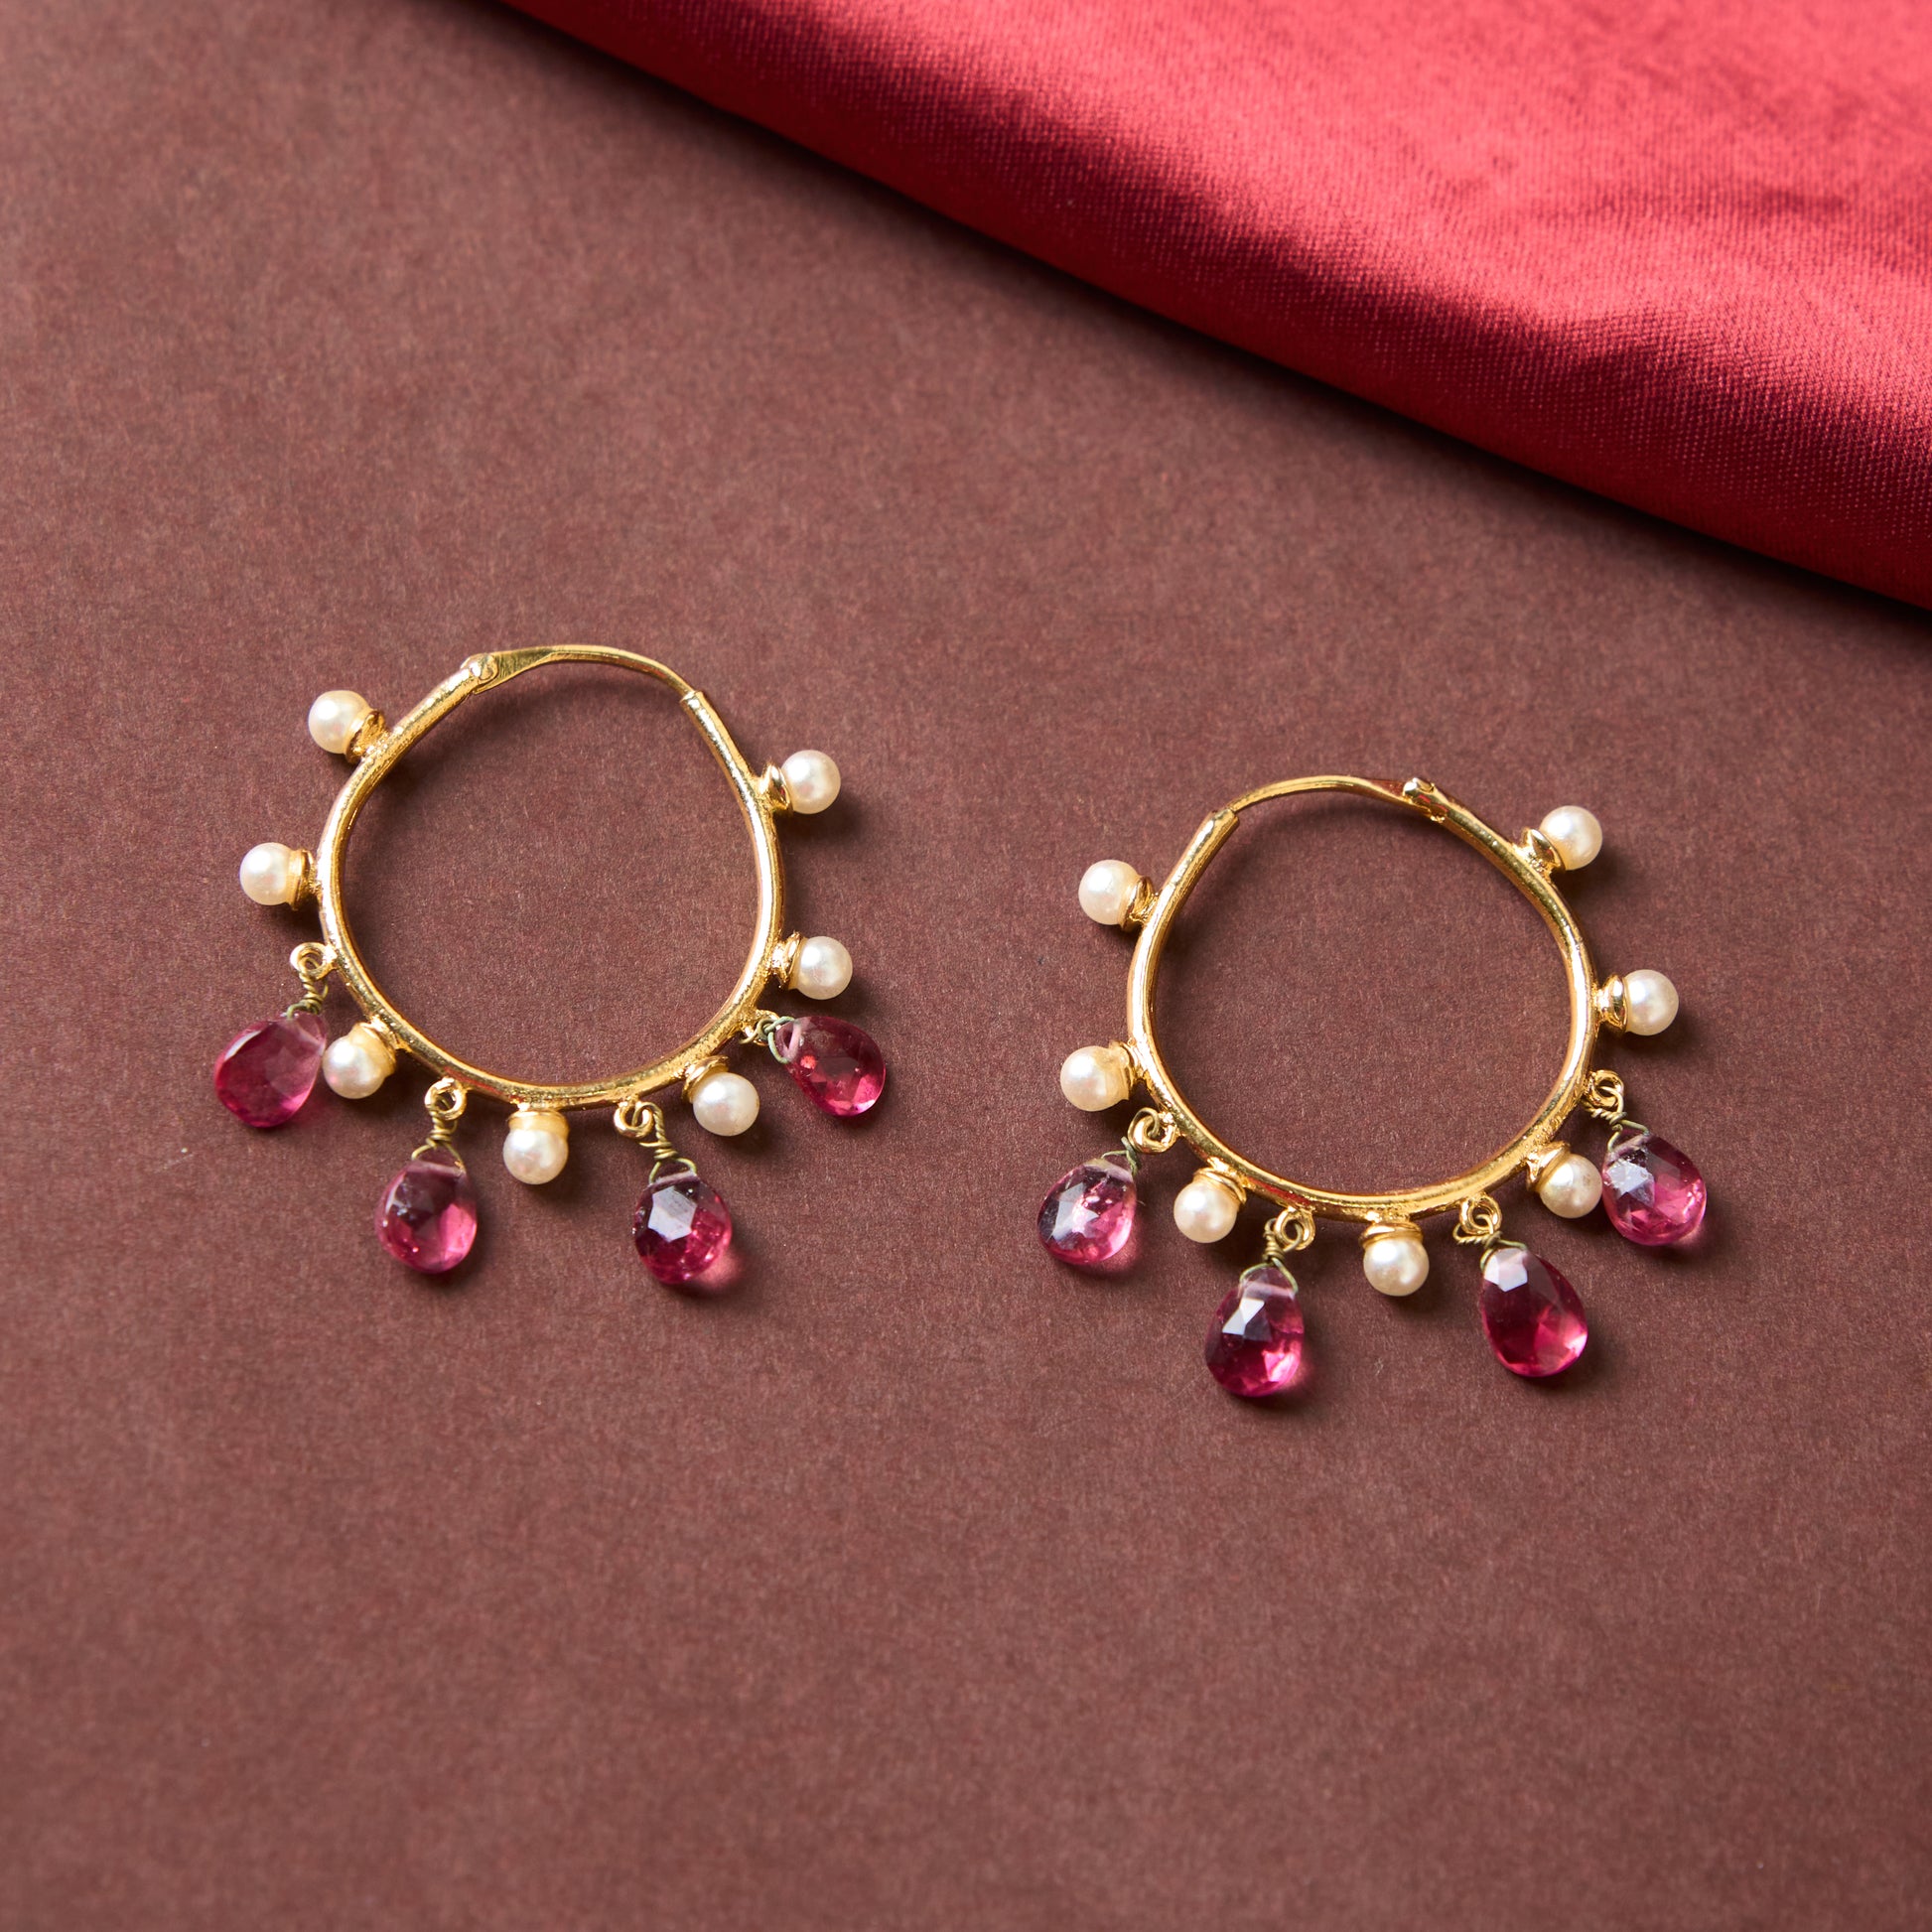 Moonstruck Gold Plated Hoop Earrings With Pearls for Women (Pink) - www.MoonstruckINC.com